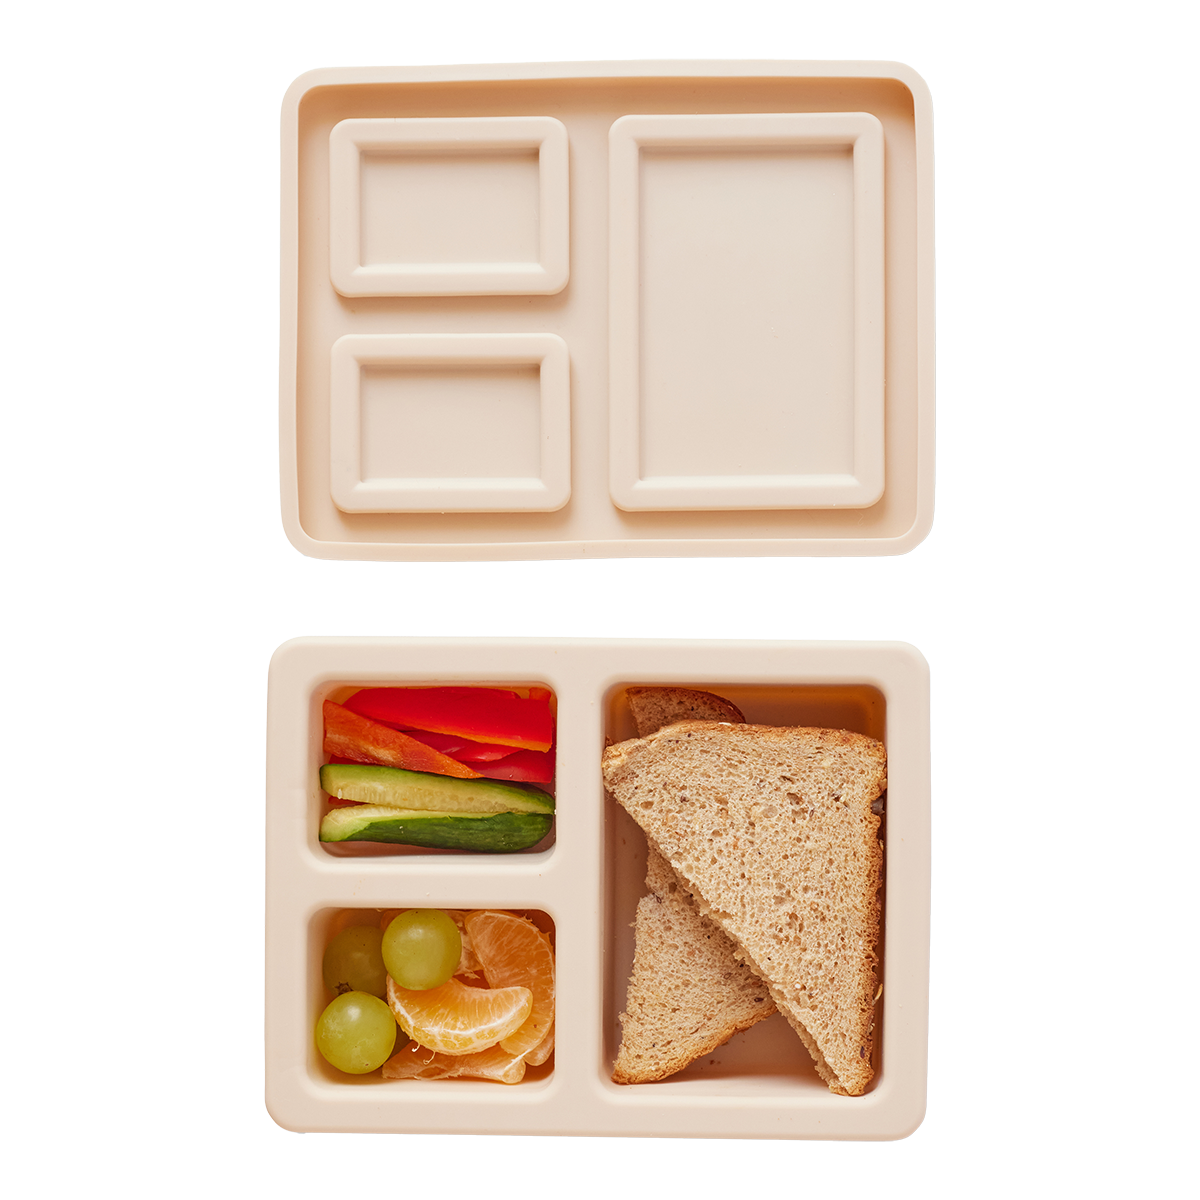 cream lunch bento box with three compartments inside